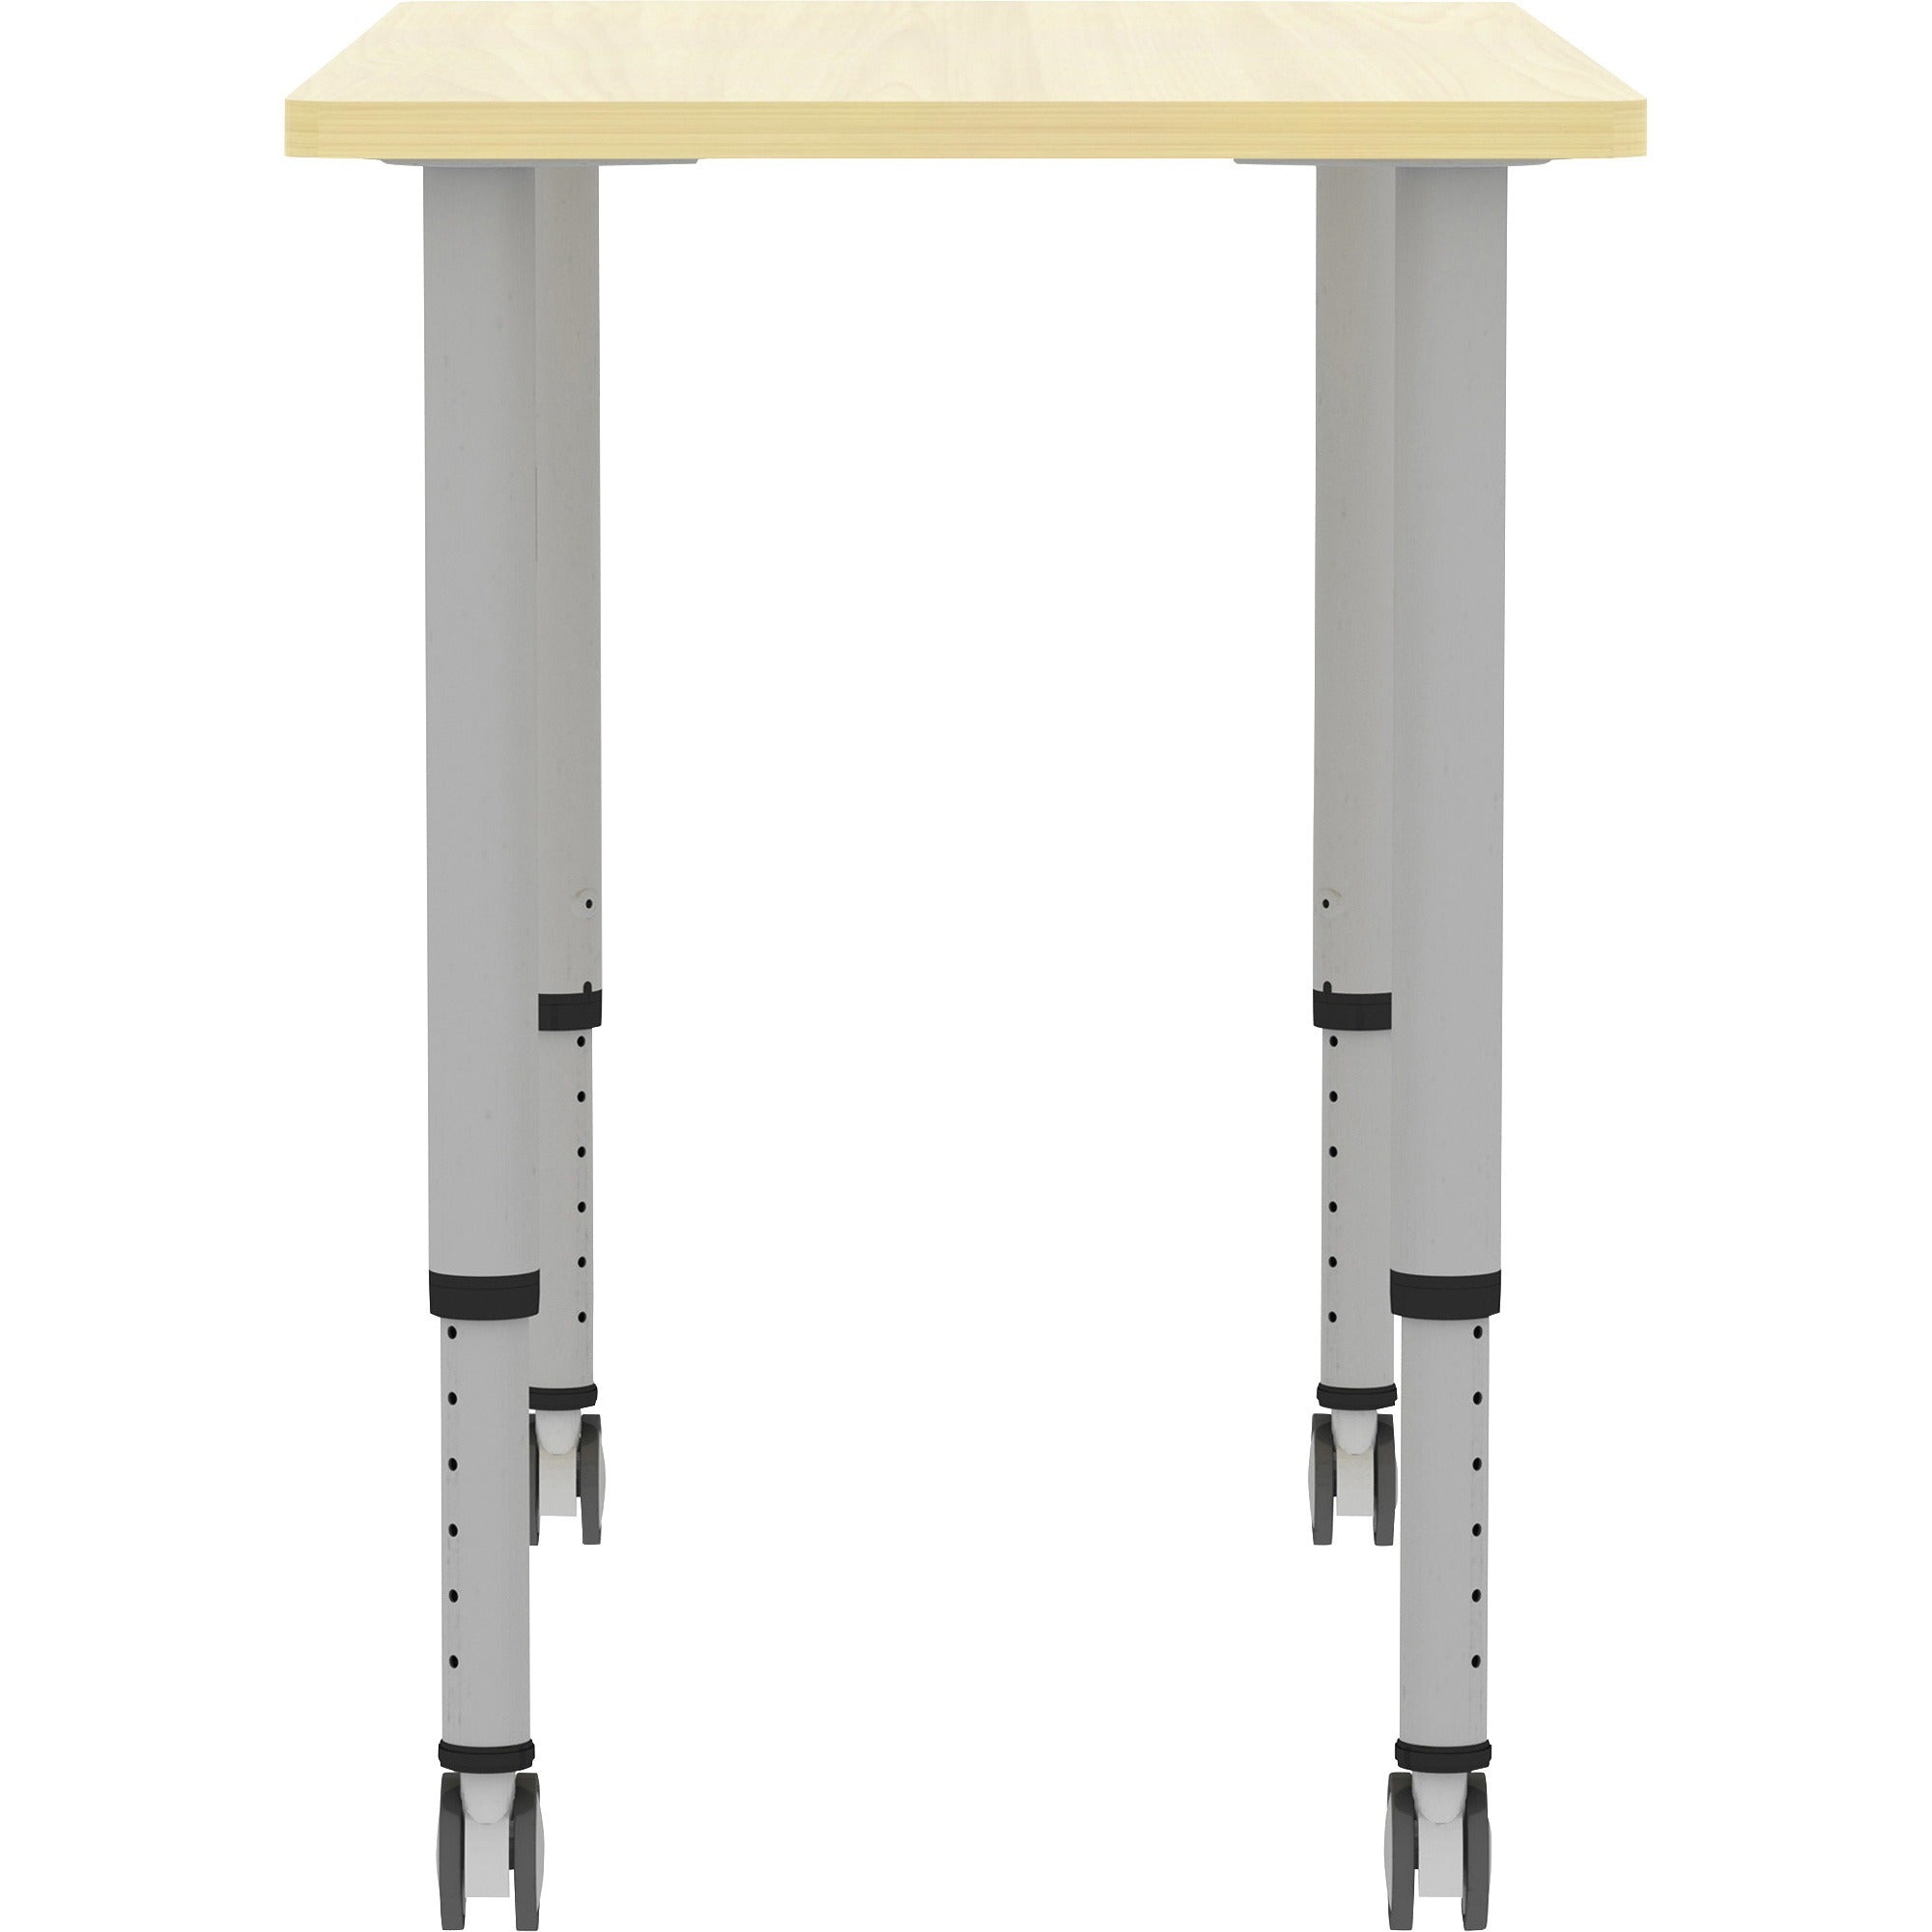 lorell-attune-height-adjustable-multipurpose-rectangular-table-for-table-toprectangle-top-adjustable-height-2662-to-3362-adjustment-x-48-table-top-width-x-2362-table-top-depth-3362-height-assembly-required-laminated-maple-la_llr69582 - 4